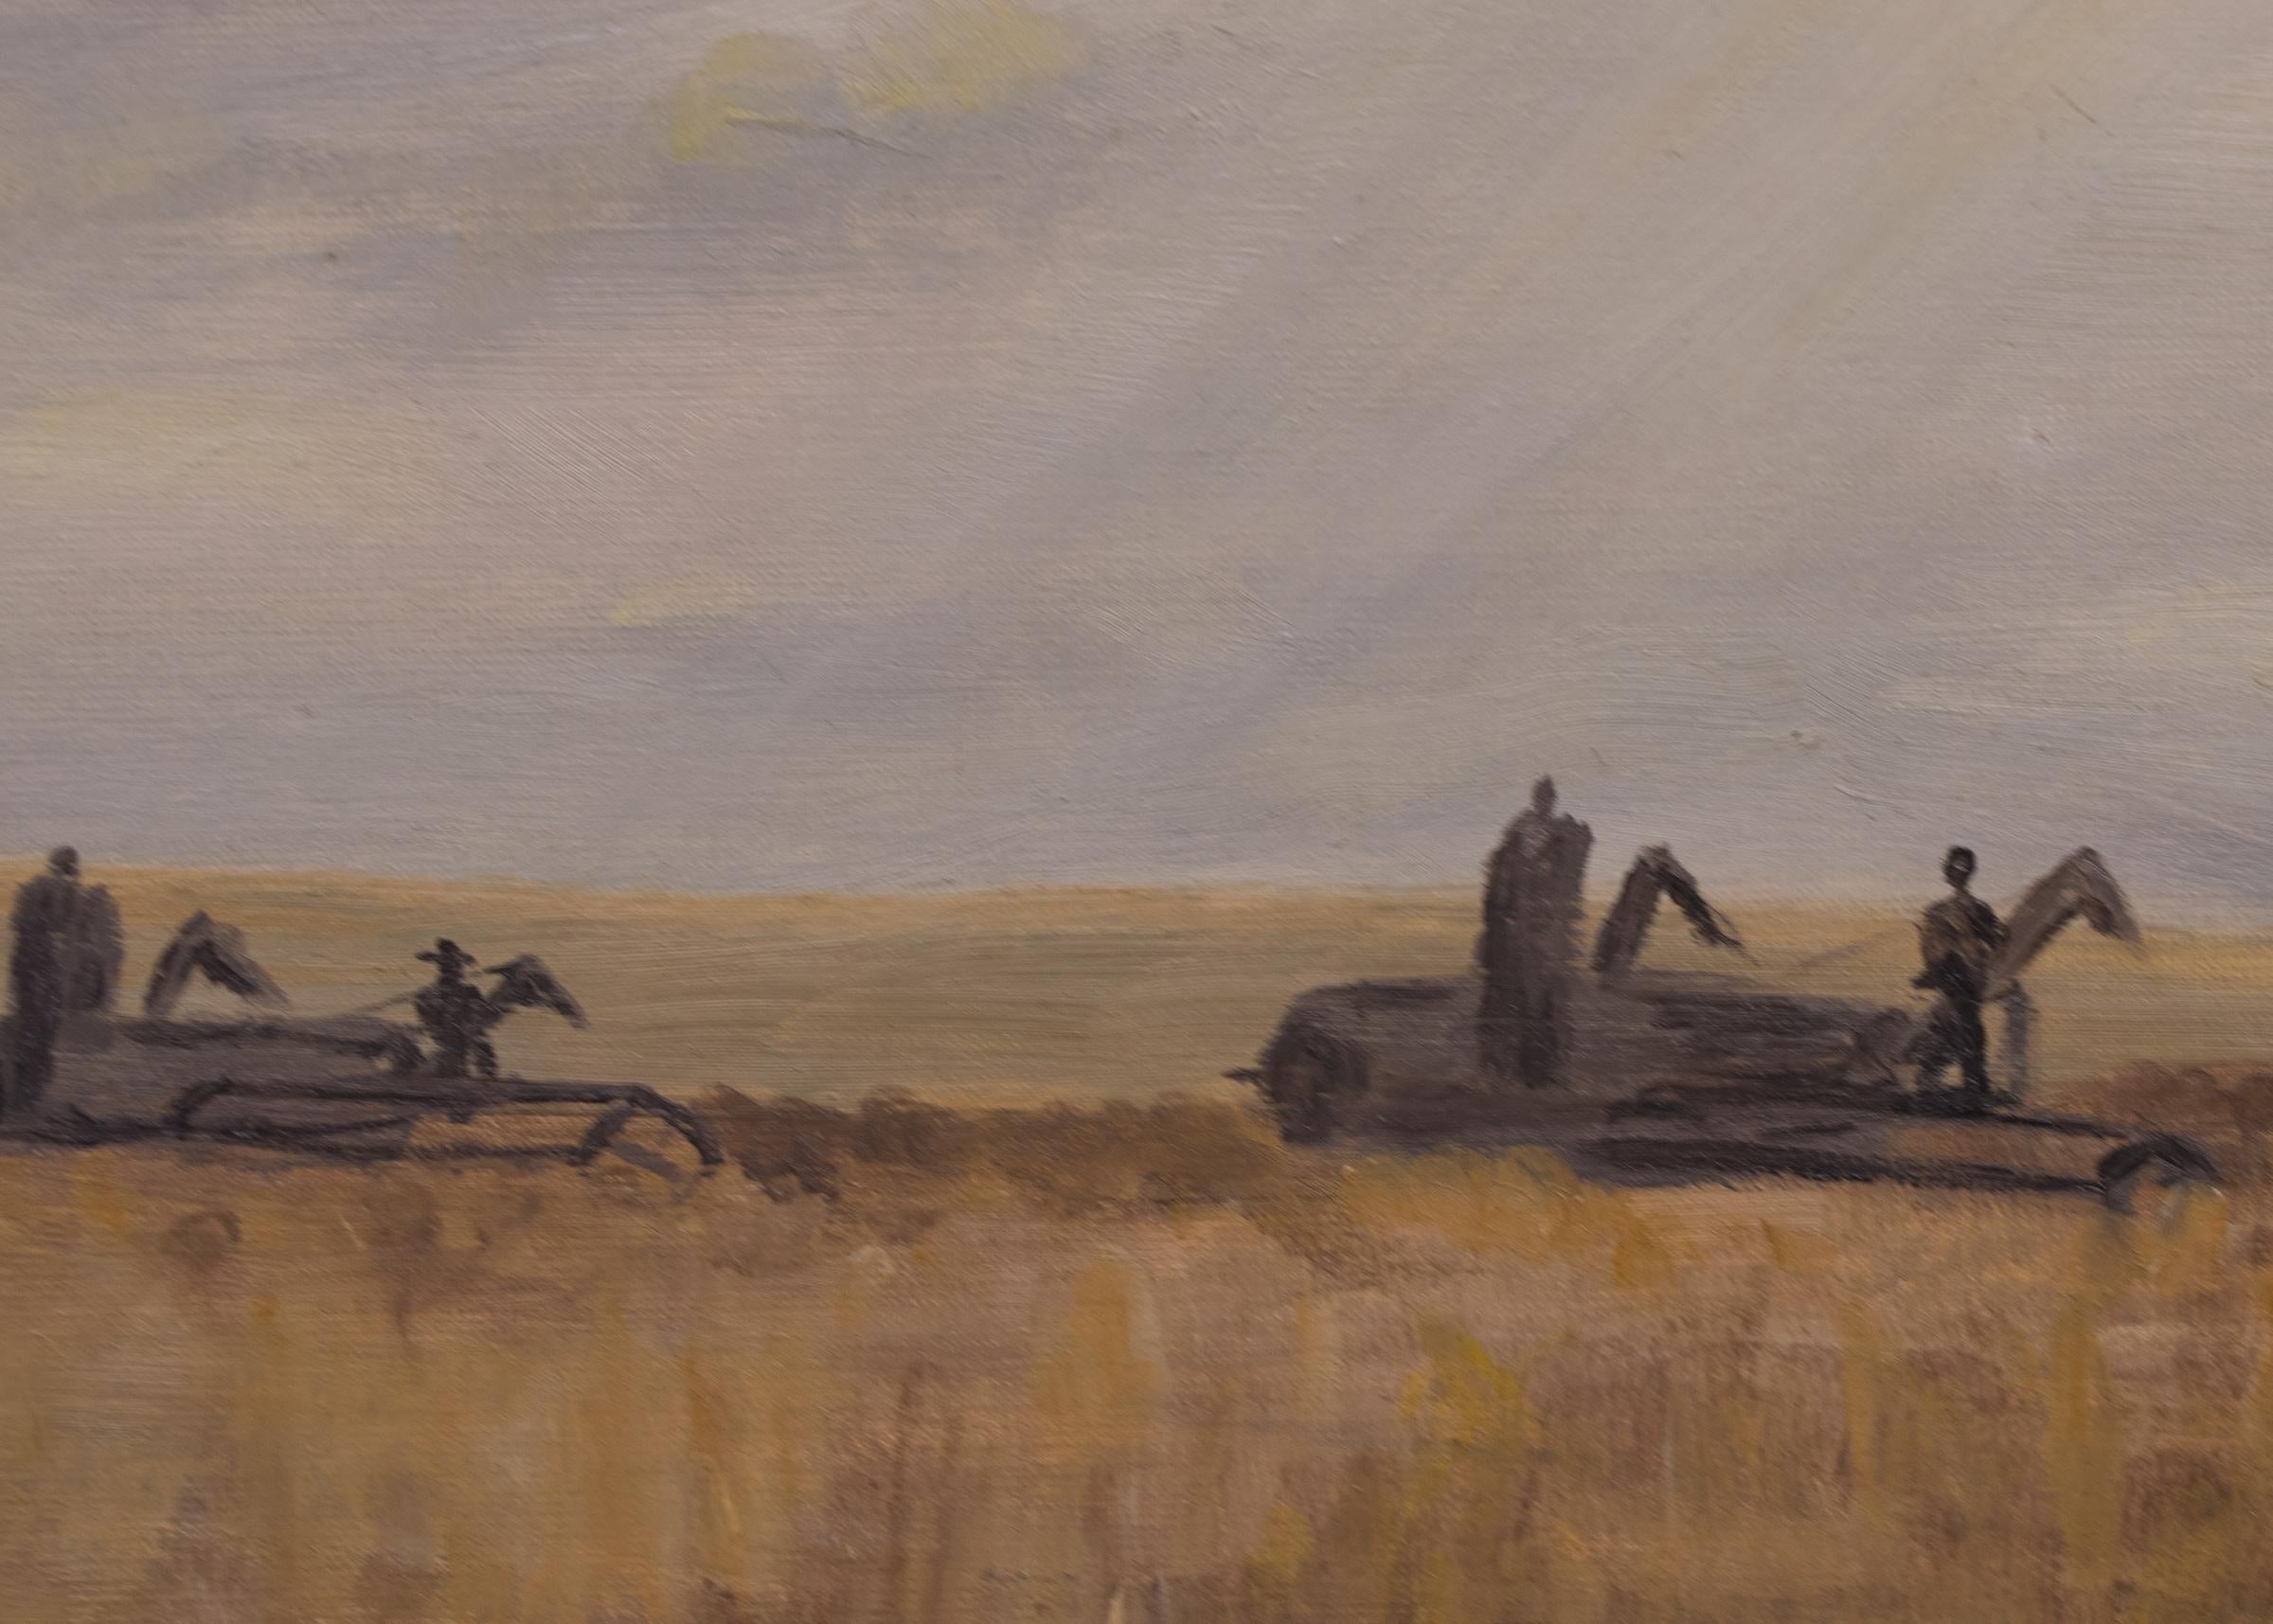 Harvesting Wheat in Colorado, American Scene Landscape Oil Painting, Brown, Gray - Black Figurative Painting by Anna Essick